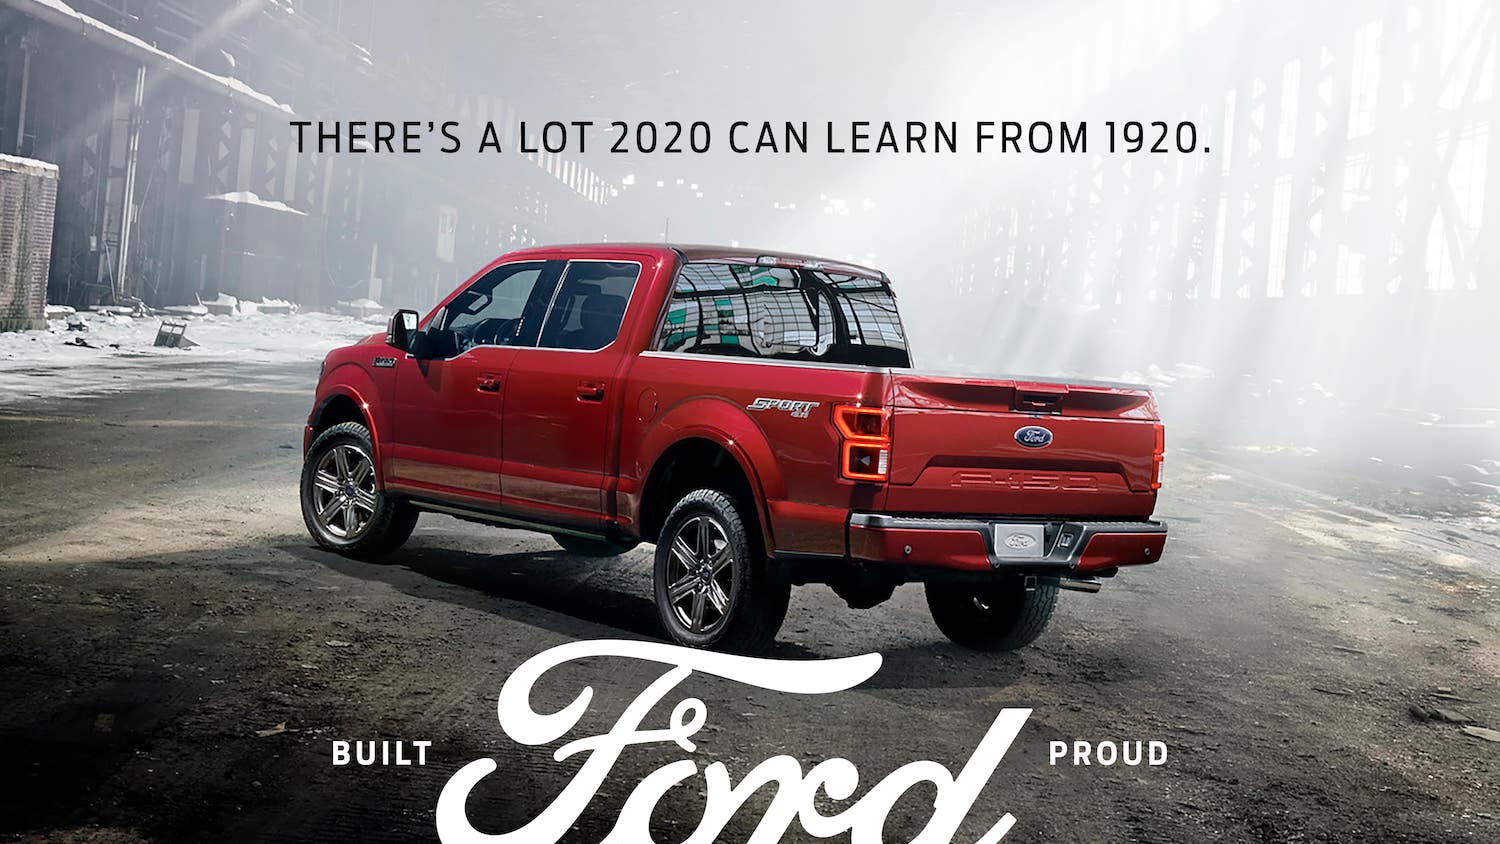 The Origin of Ford's “Built Ford Tough” Slogan